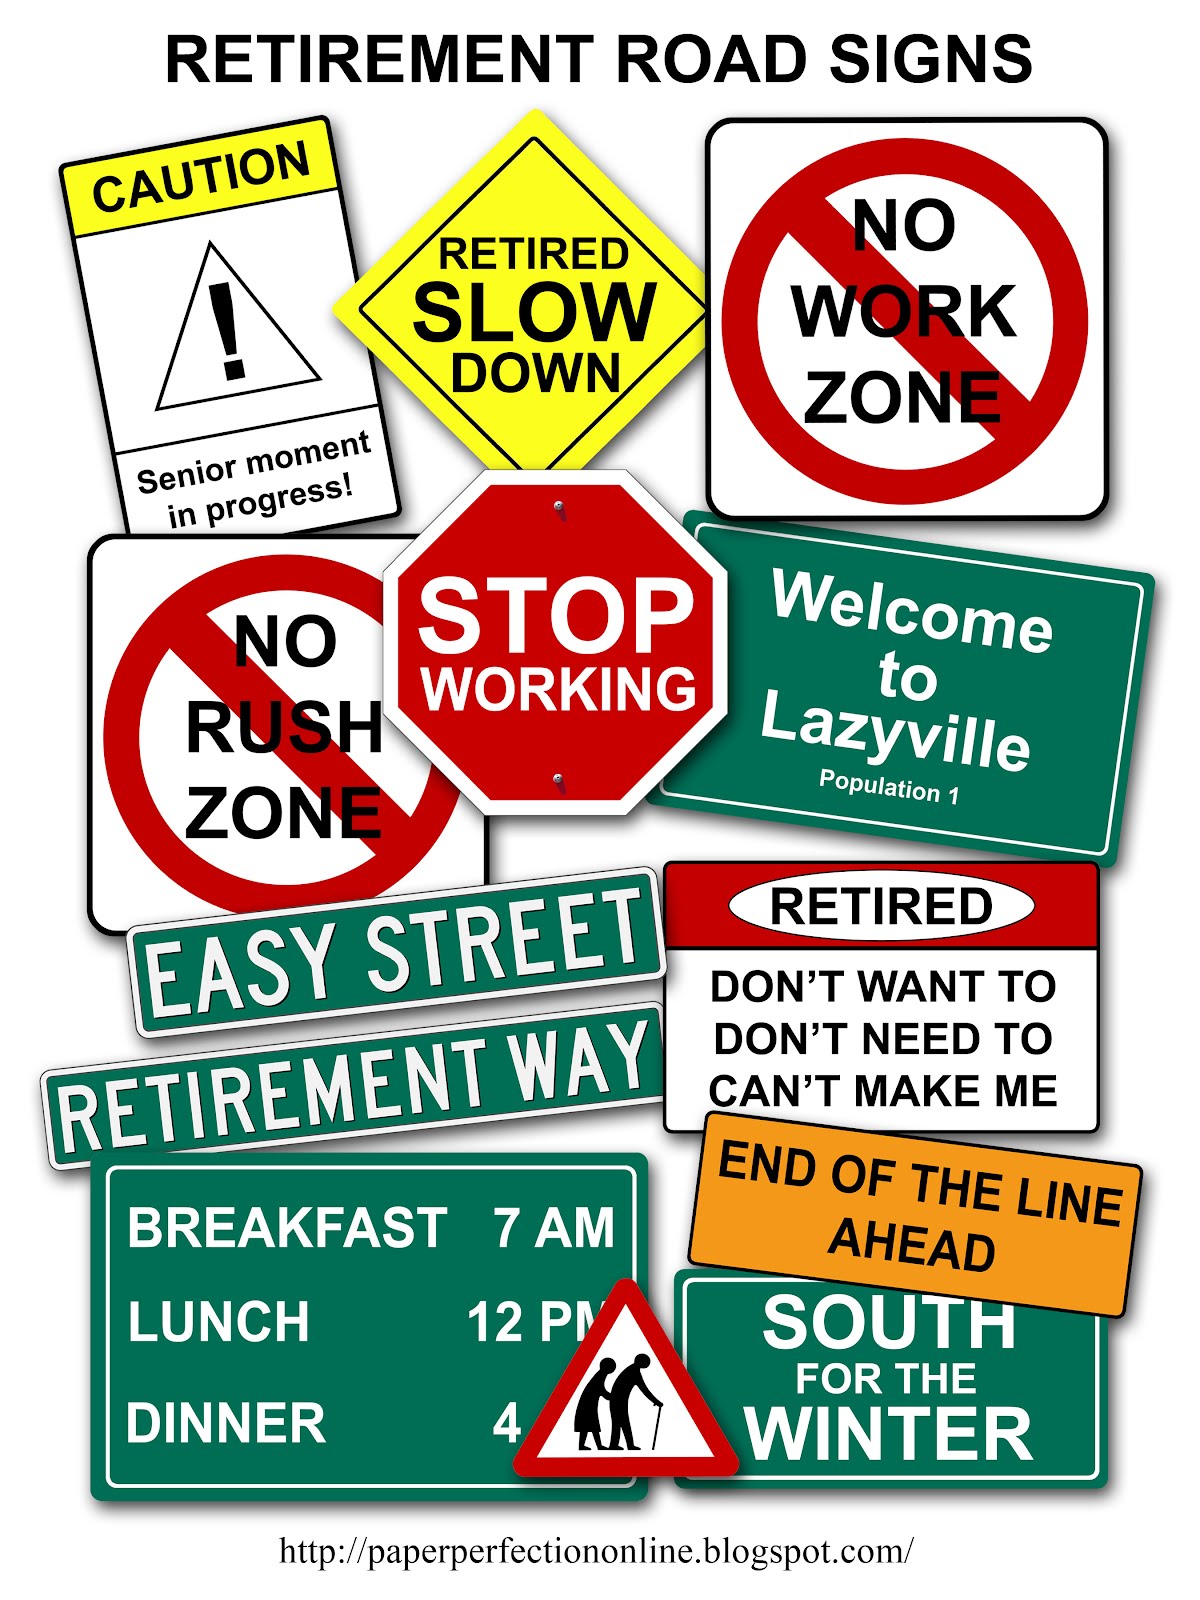 Paper Perfection Retirement Road Signs.